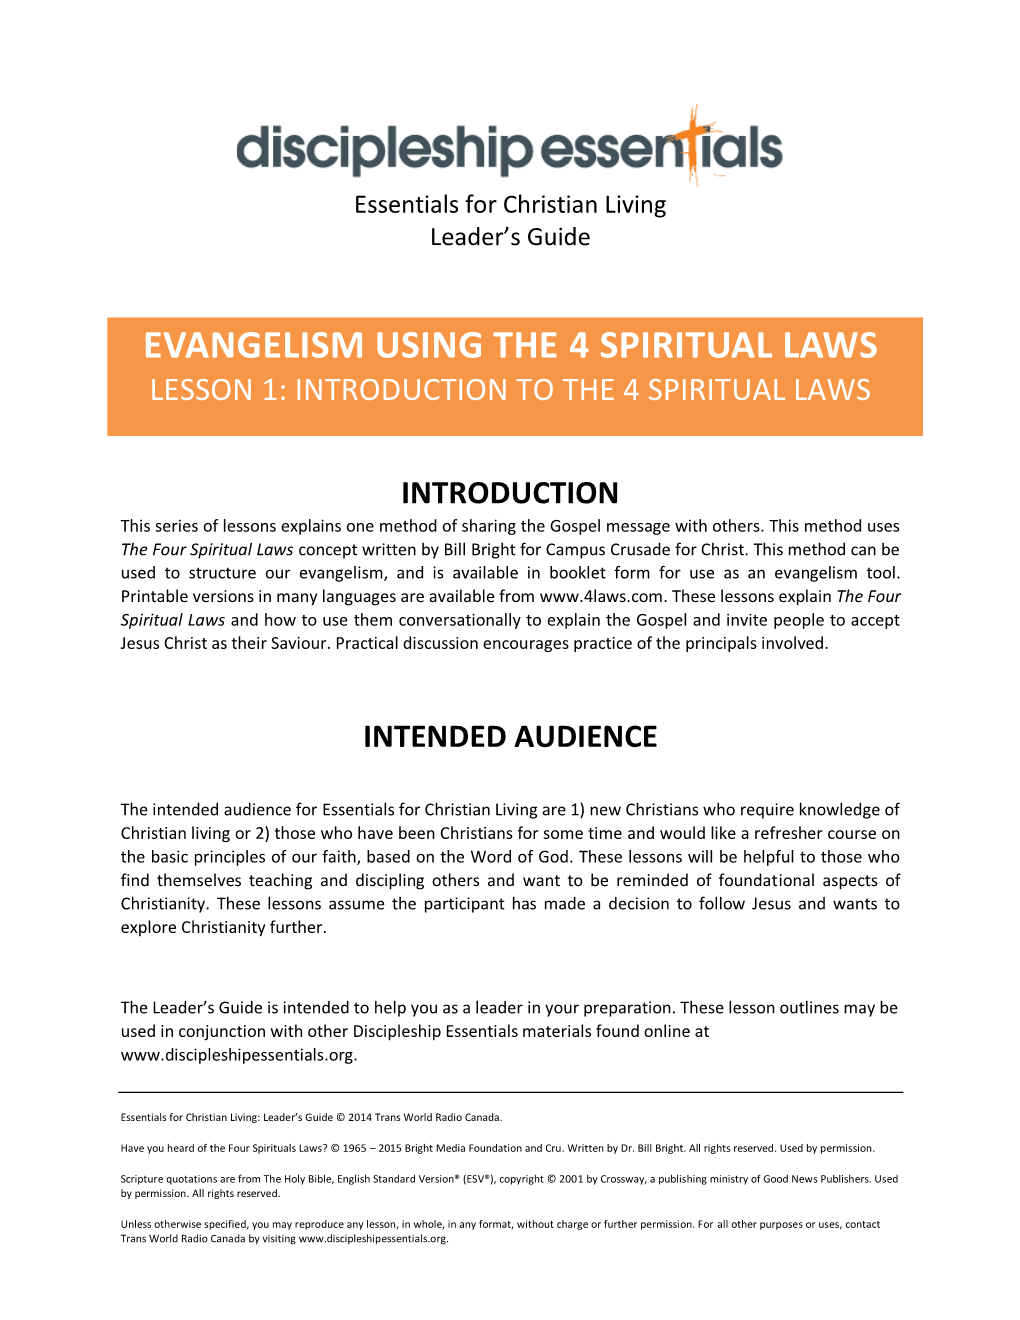 Evangelism Using the 4 Spiritual Laws Lesson 1: Introduction to the 4 Spiritual Laws